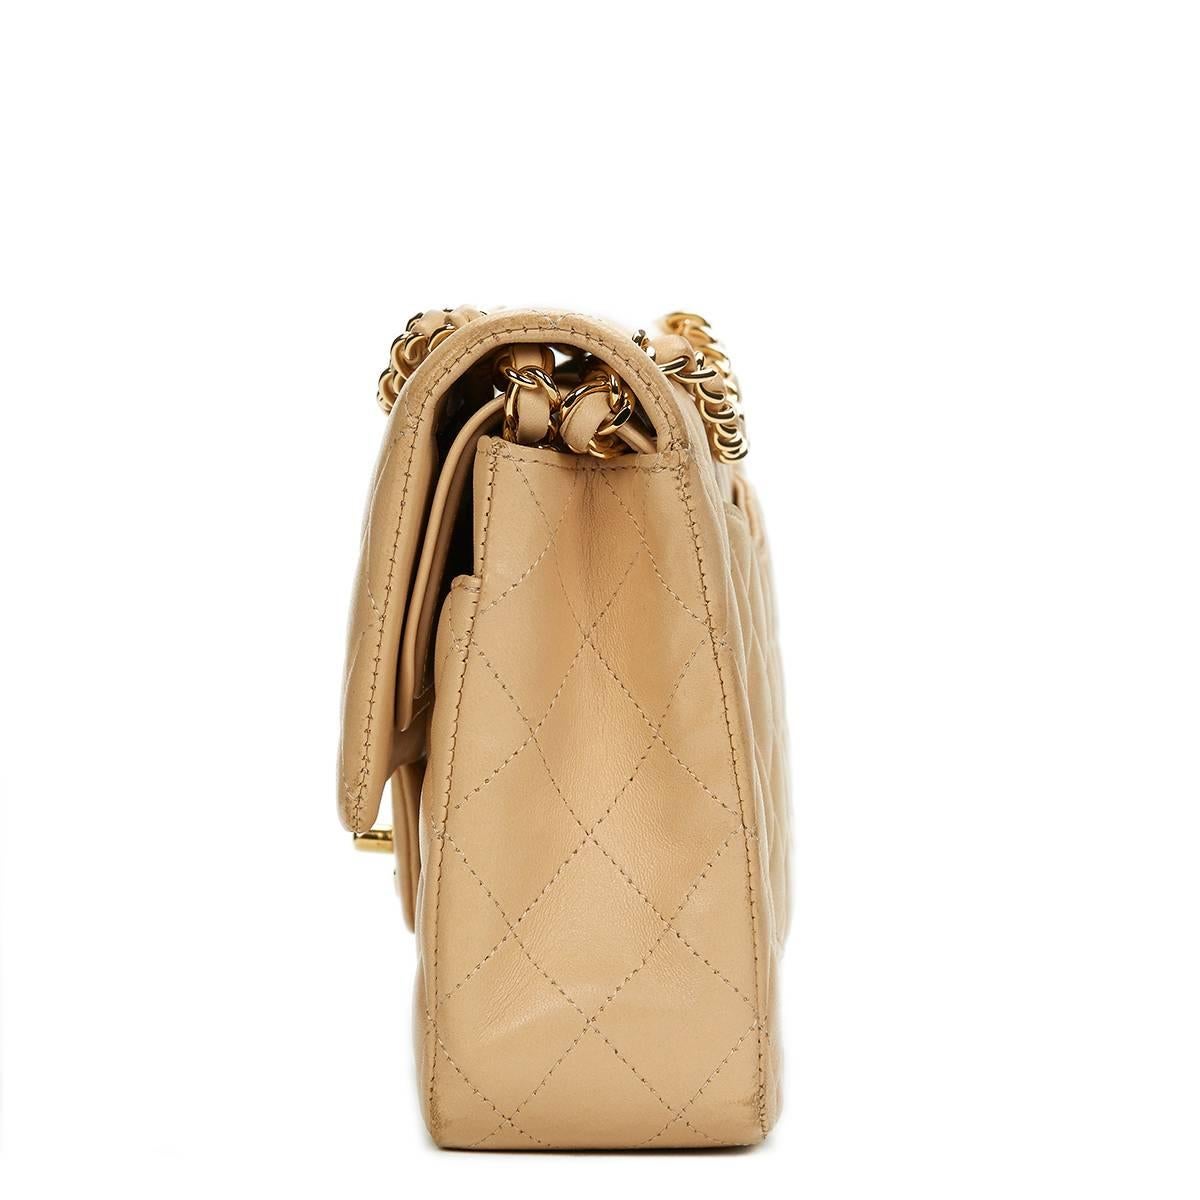 CHANEL
Beige Quilted Lambskin Classic Double Flap Bag

This CHANEL Medium Classic Double Flap Bag is in Excellent Pre-Owned Condition accompanied by Chanel Dust Bag, Authenticity Card, Box, Care Cards, Booklet. Circa 2012. Primarily made from